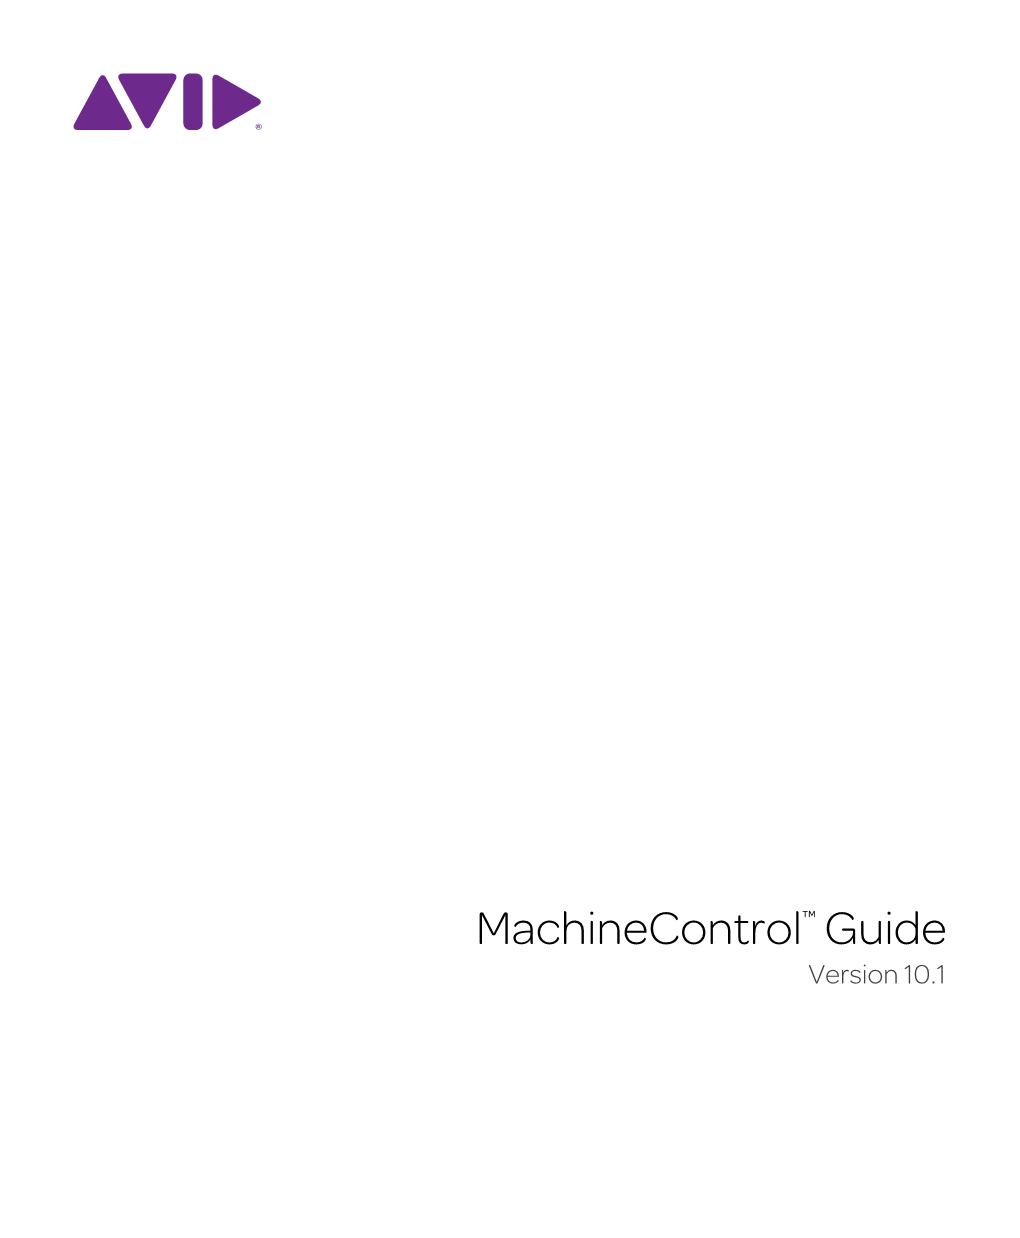 Machinecontrol Guide Chapter 1: Introduction